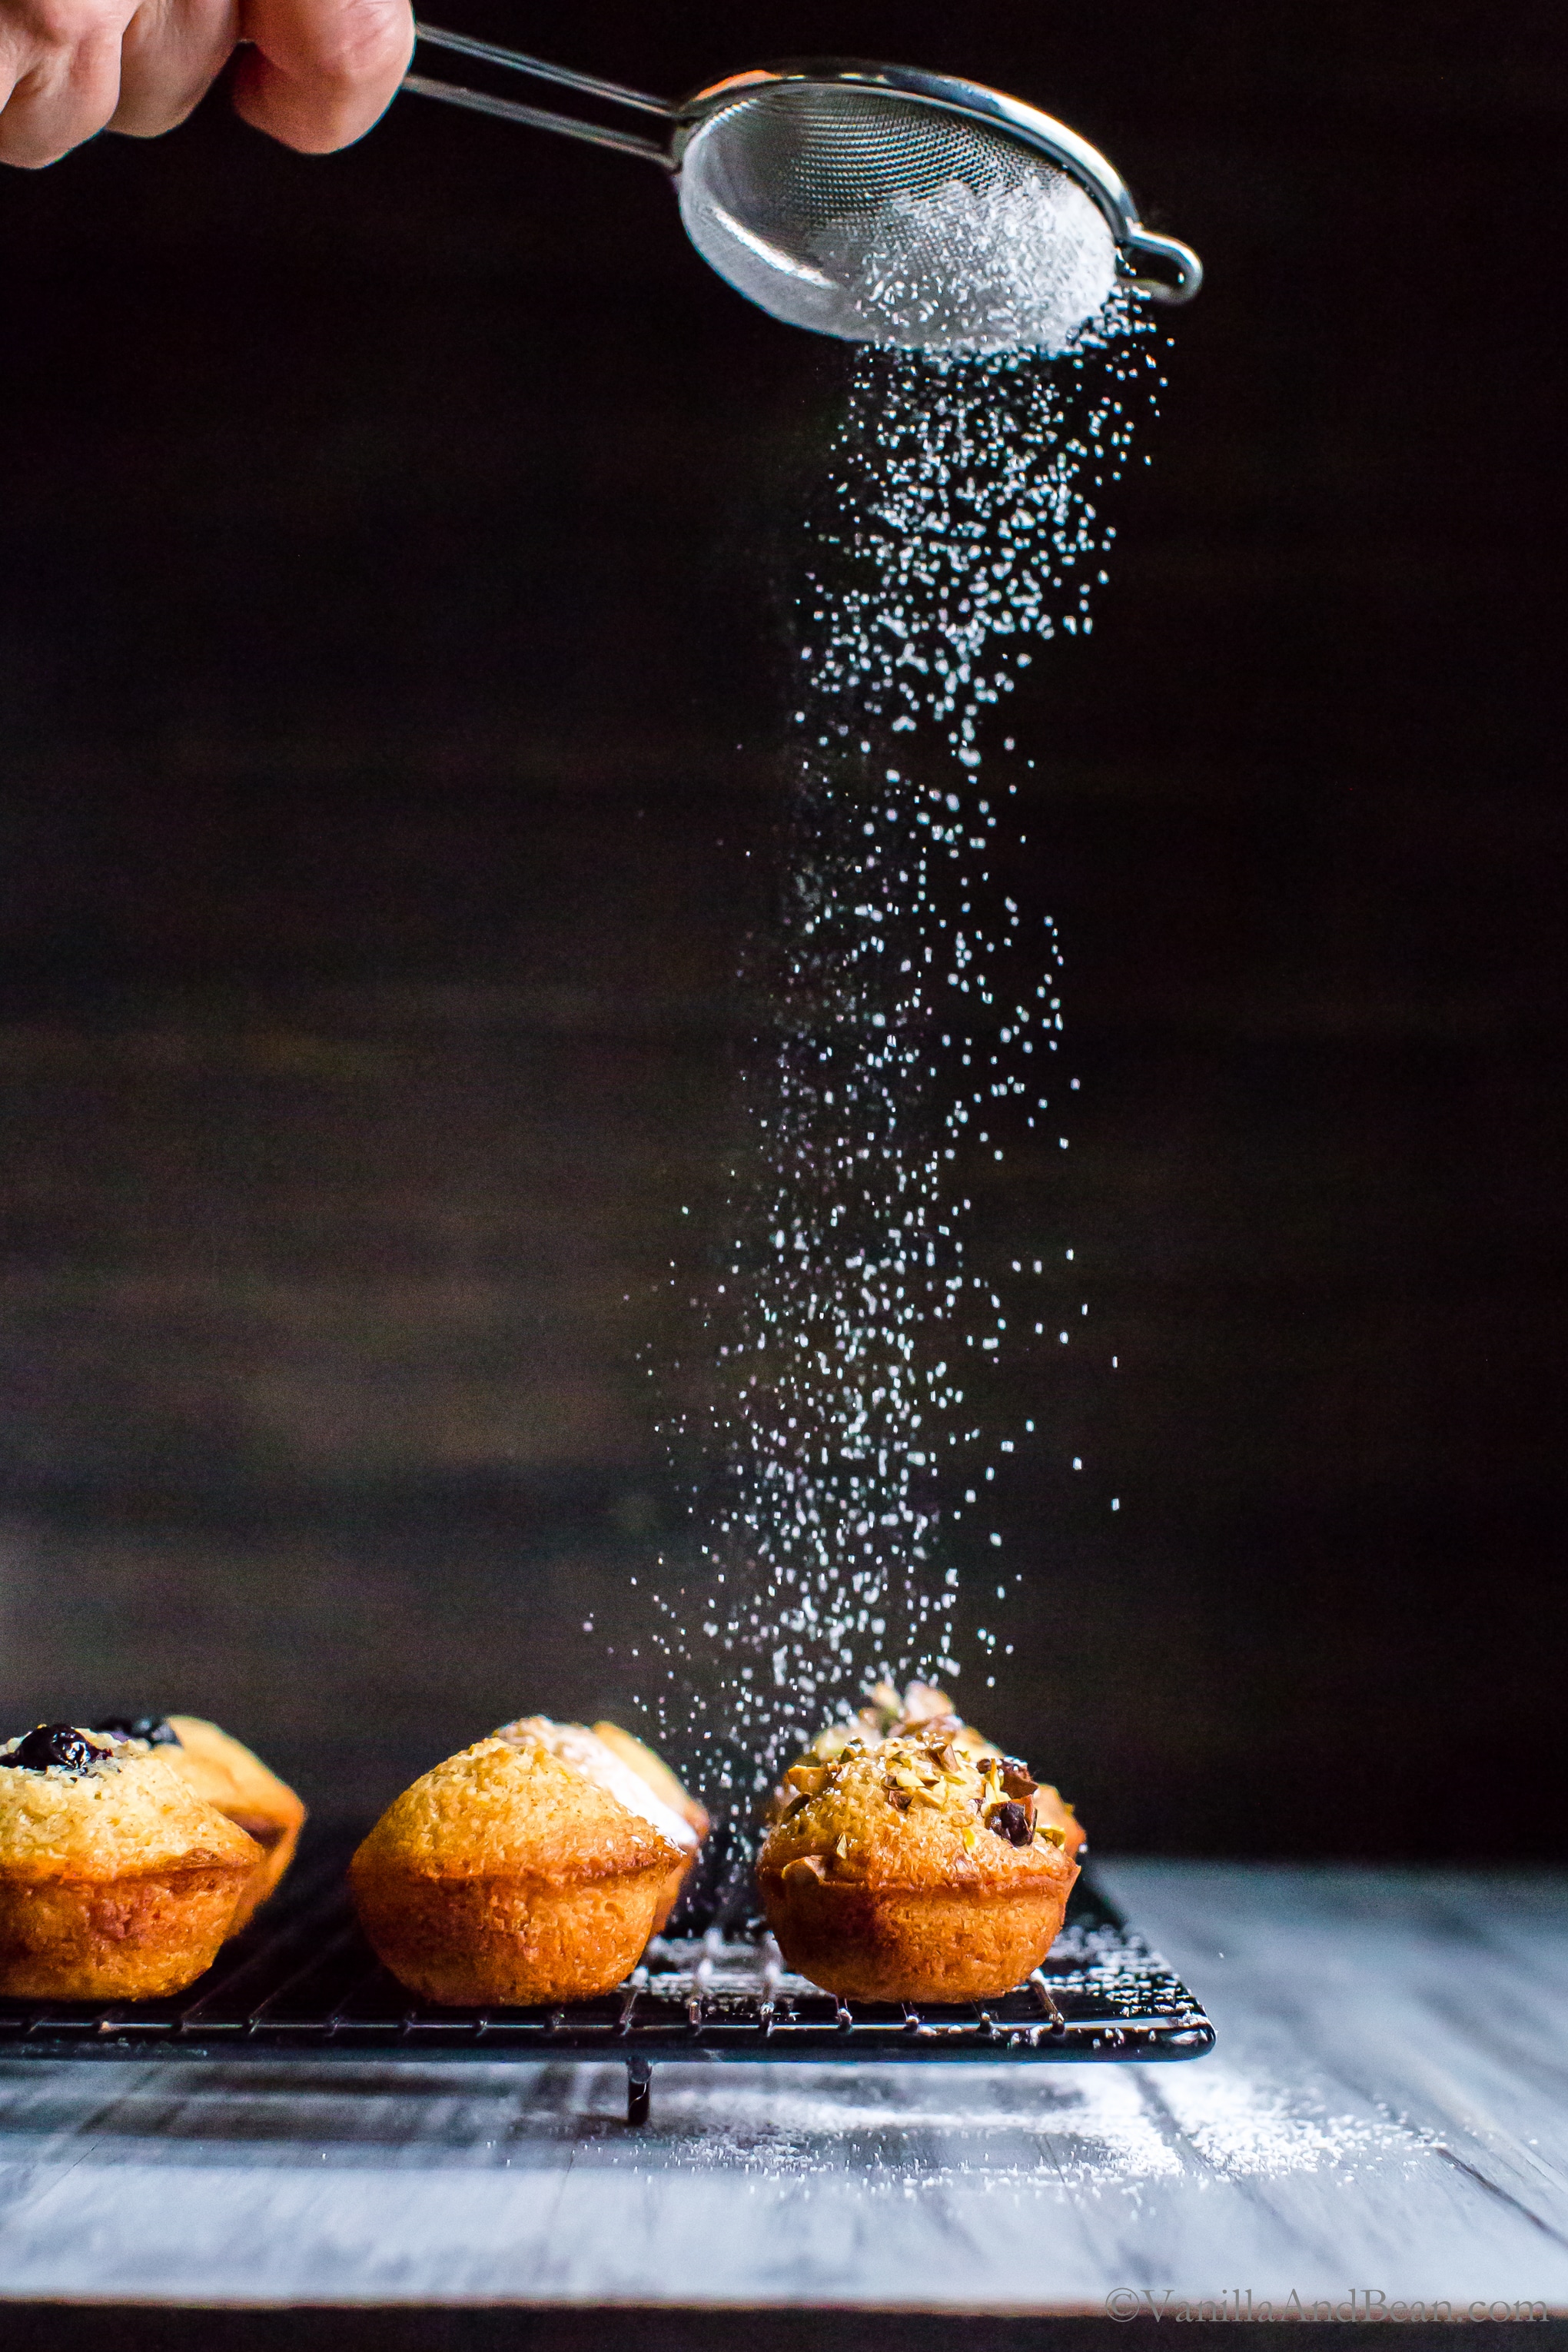 Dusting powder sugar over the Almond-Orange Mini Tea Cakes with Brown Butter.